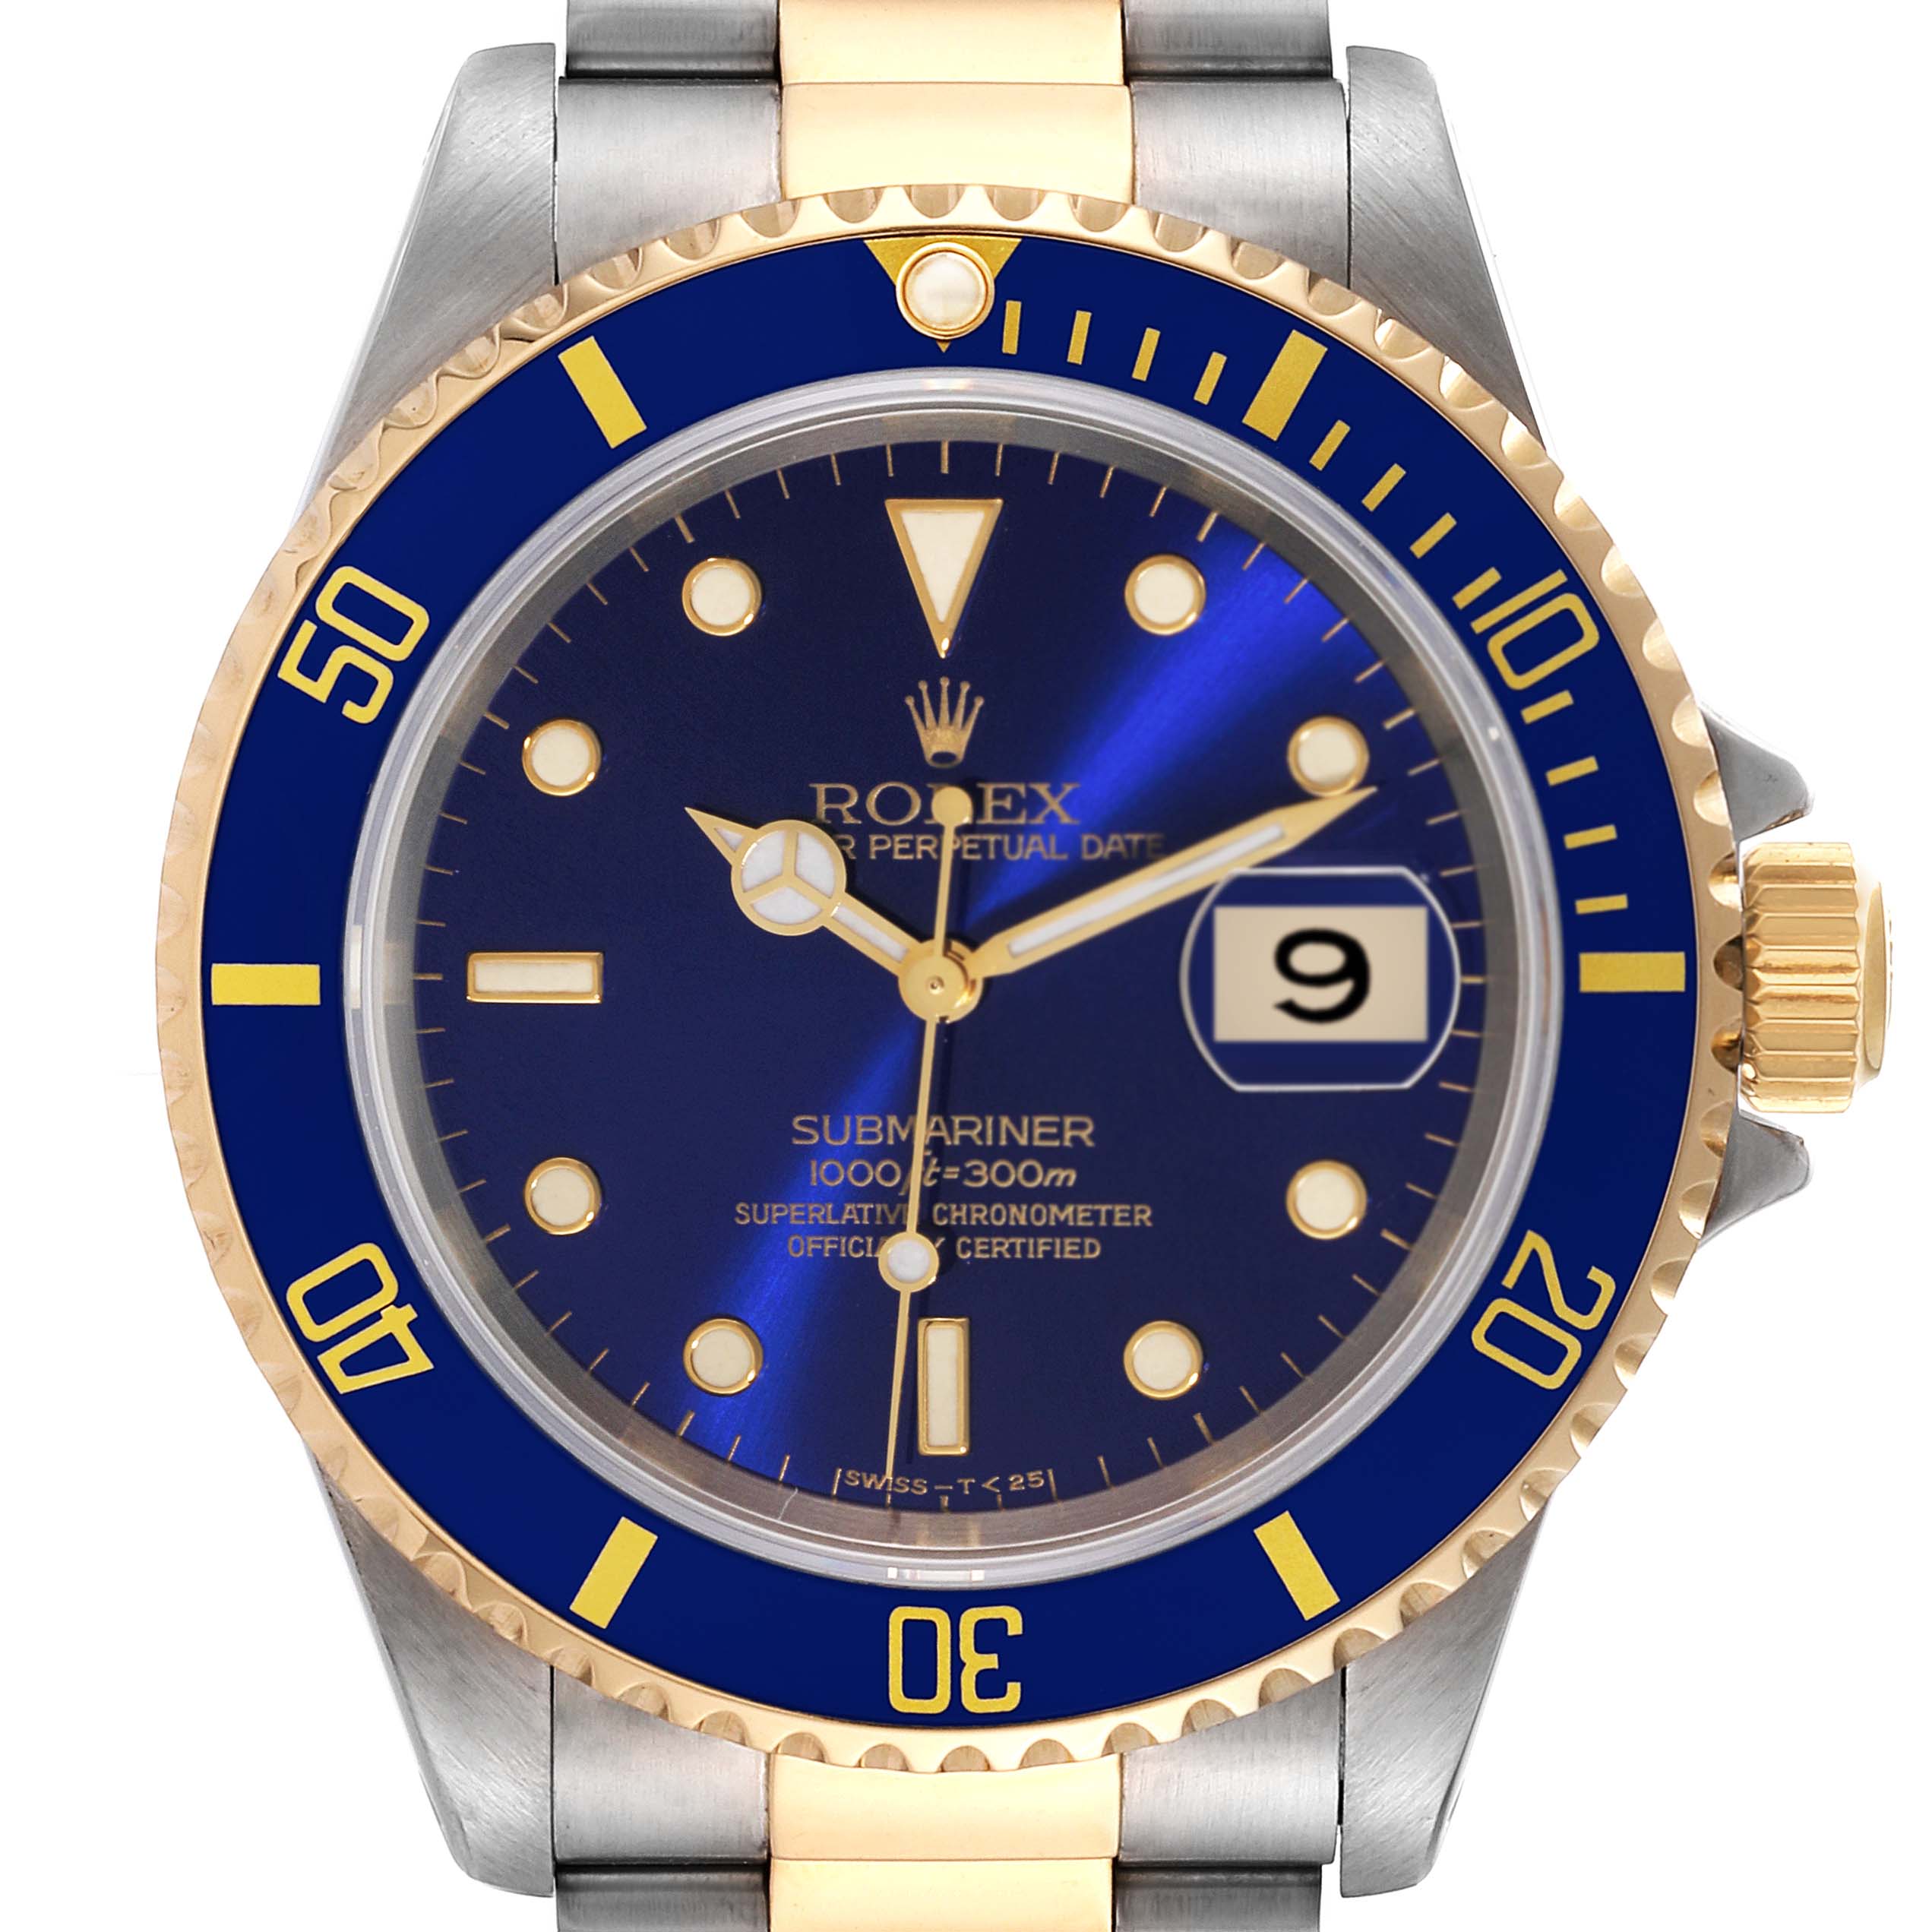 Rolex Submariner Blue Watches Review and Guide